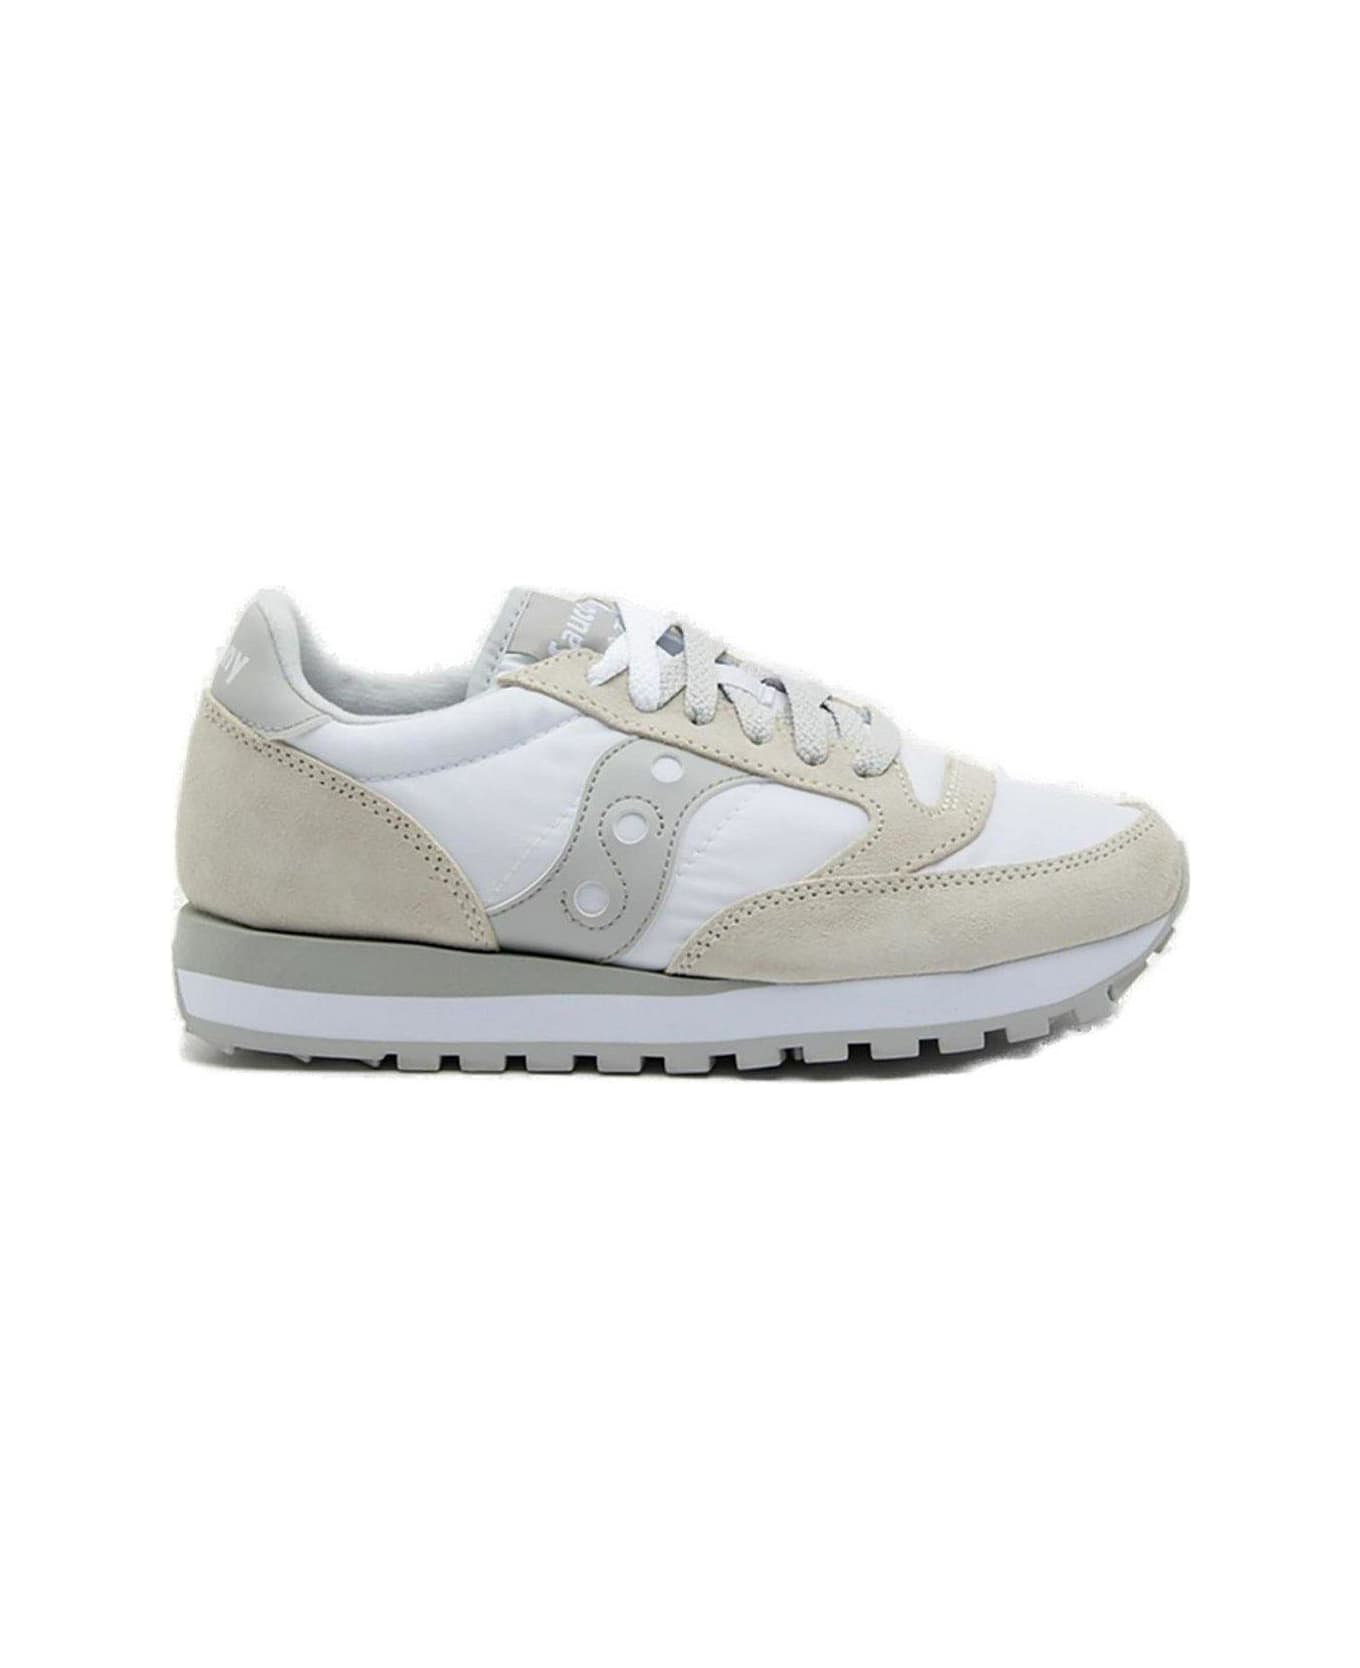 Saucony Jazz Original Lace-up Sneakers Sneakers - WHITE